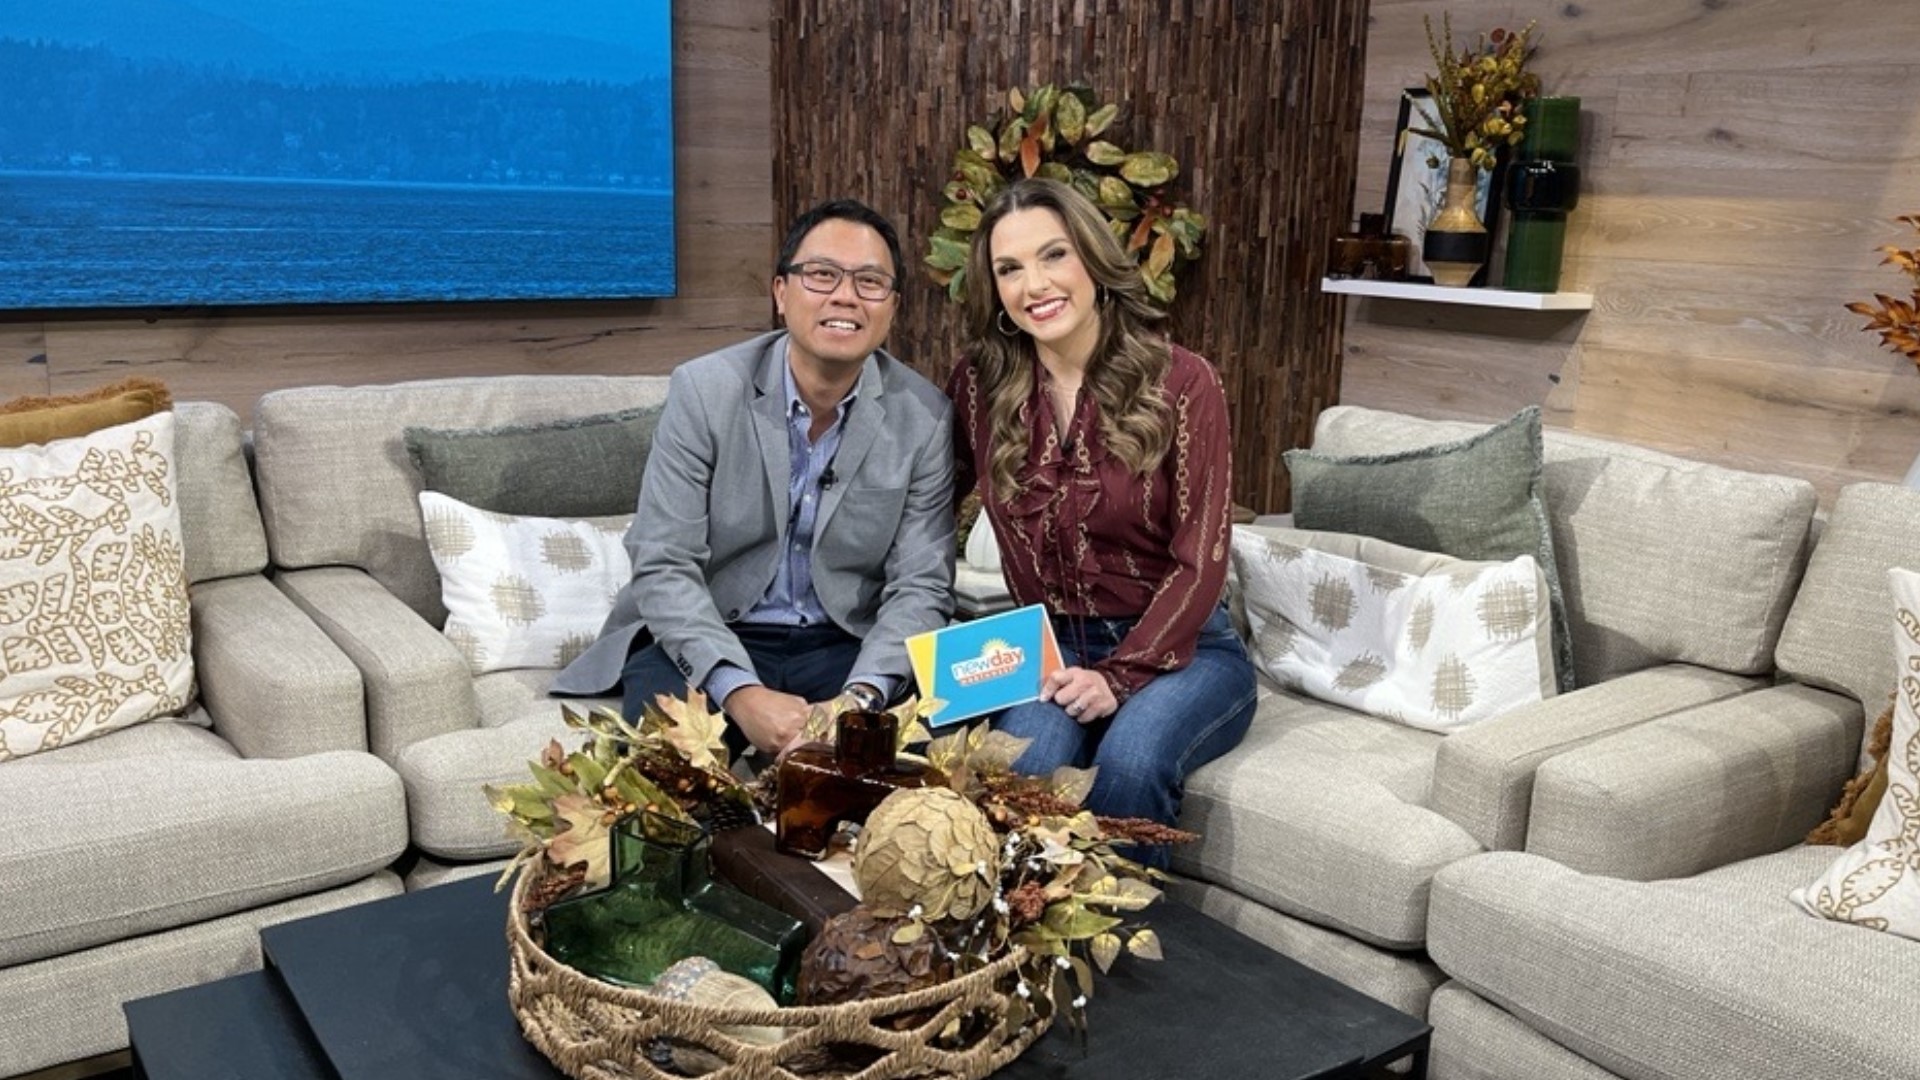 Urologist Dr. Khanh Pham from Overlake Medical Center talks about the importance of knowing prostate health especially for men over 50. Sponsored by Overlake Medical